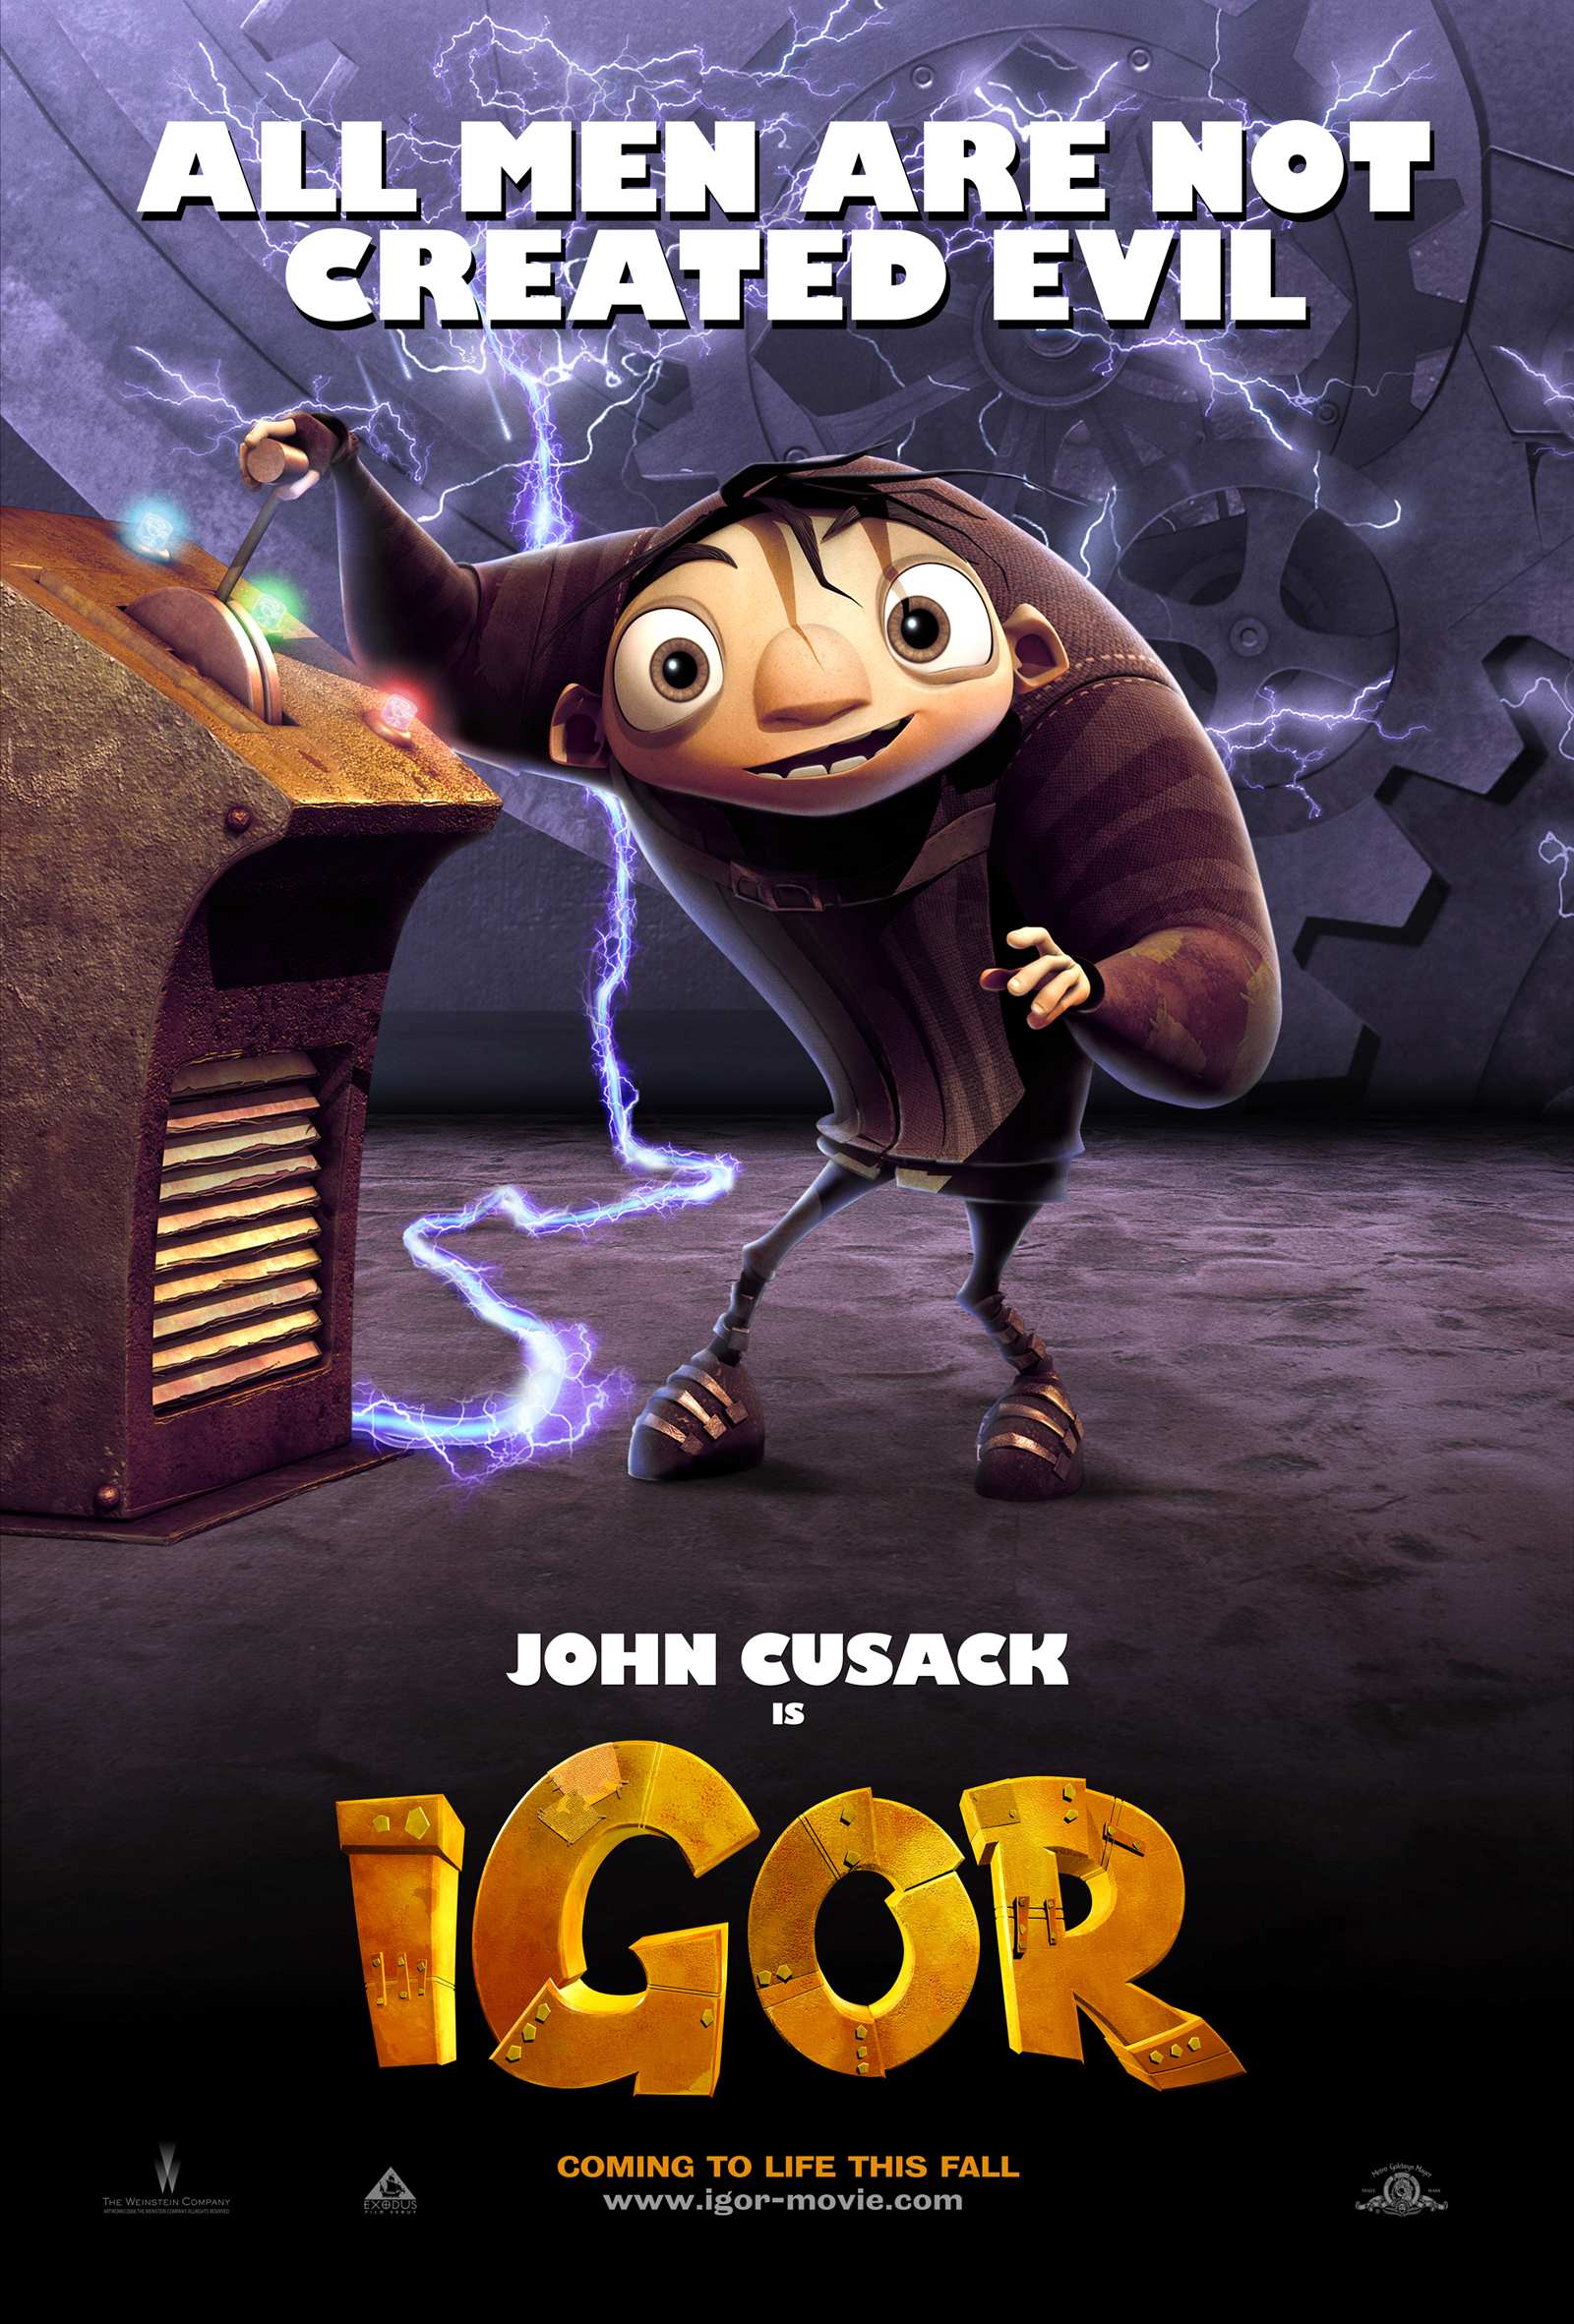 John Cusack Is Mad Scientist’s Hunchbacked Lab Assistant In Animated ‘igor’ Poster Released